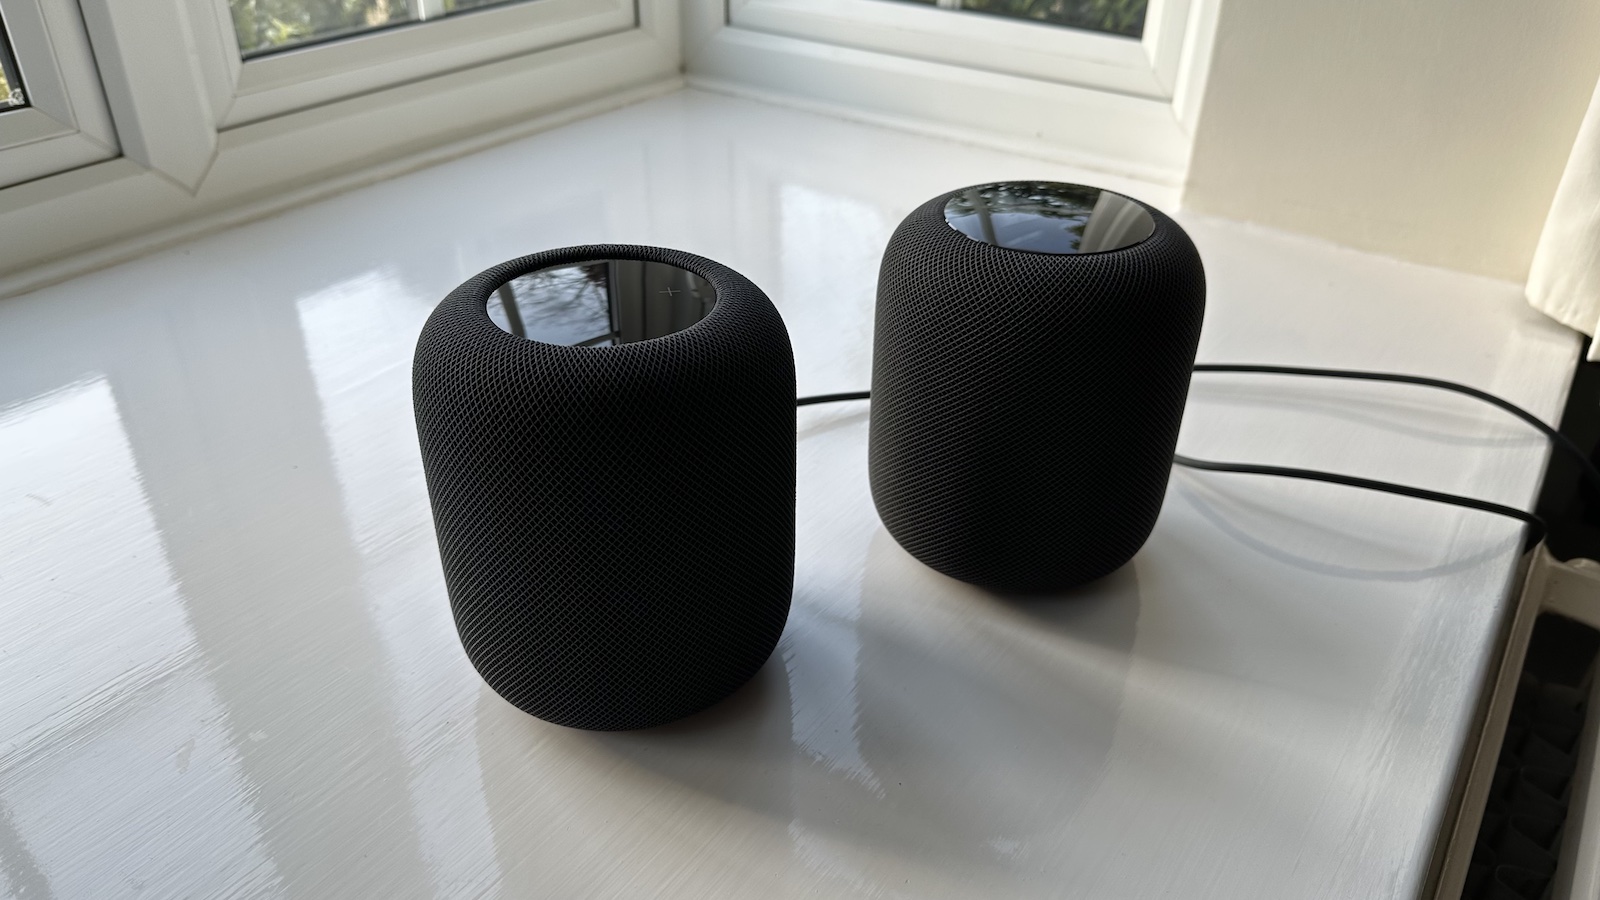 Starts Selling English-Only Echo Smart Speakers in the